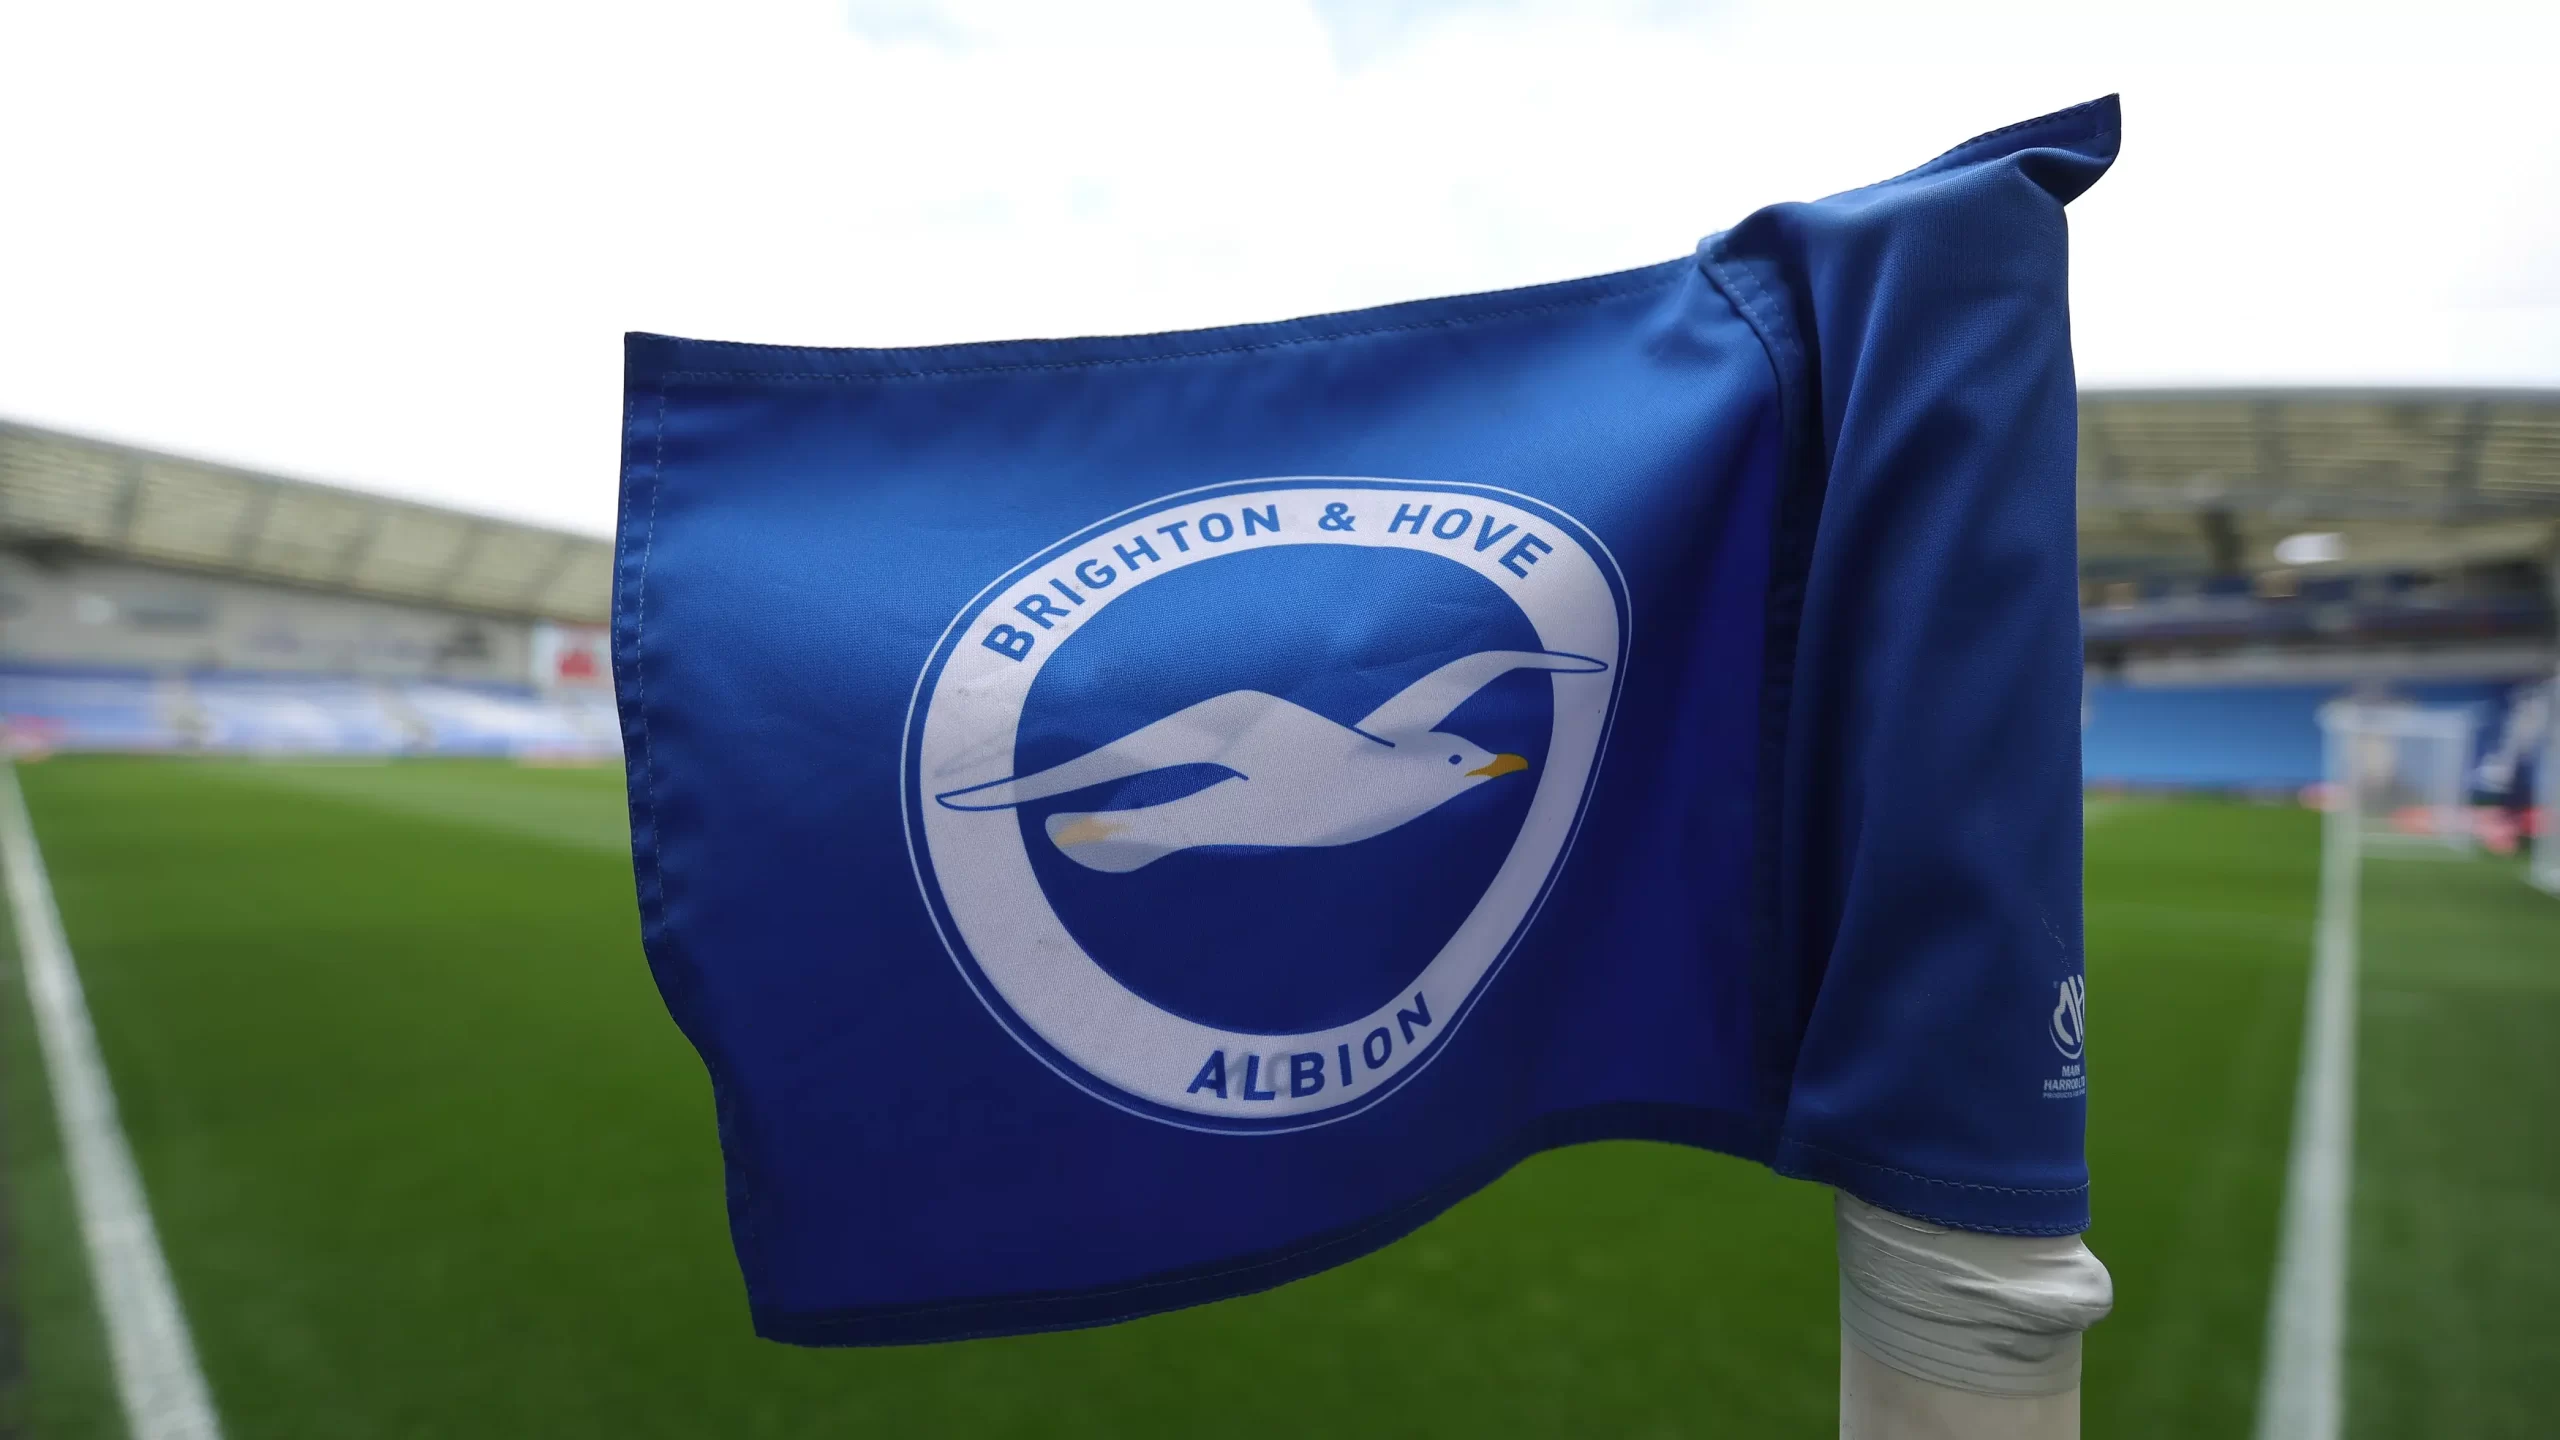 Brighton and Hove Albion FC logo in a stadium of an Europa League match